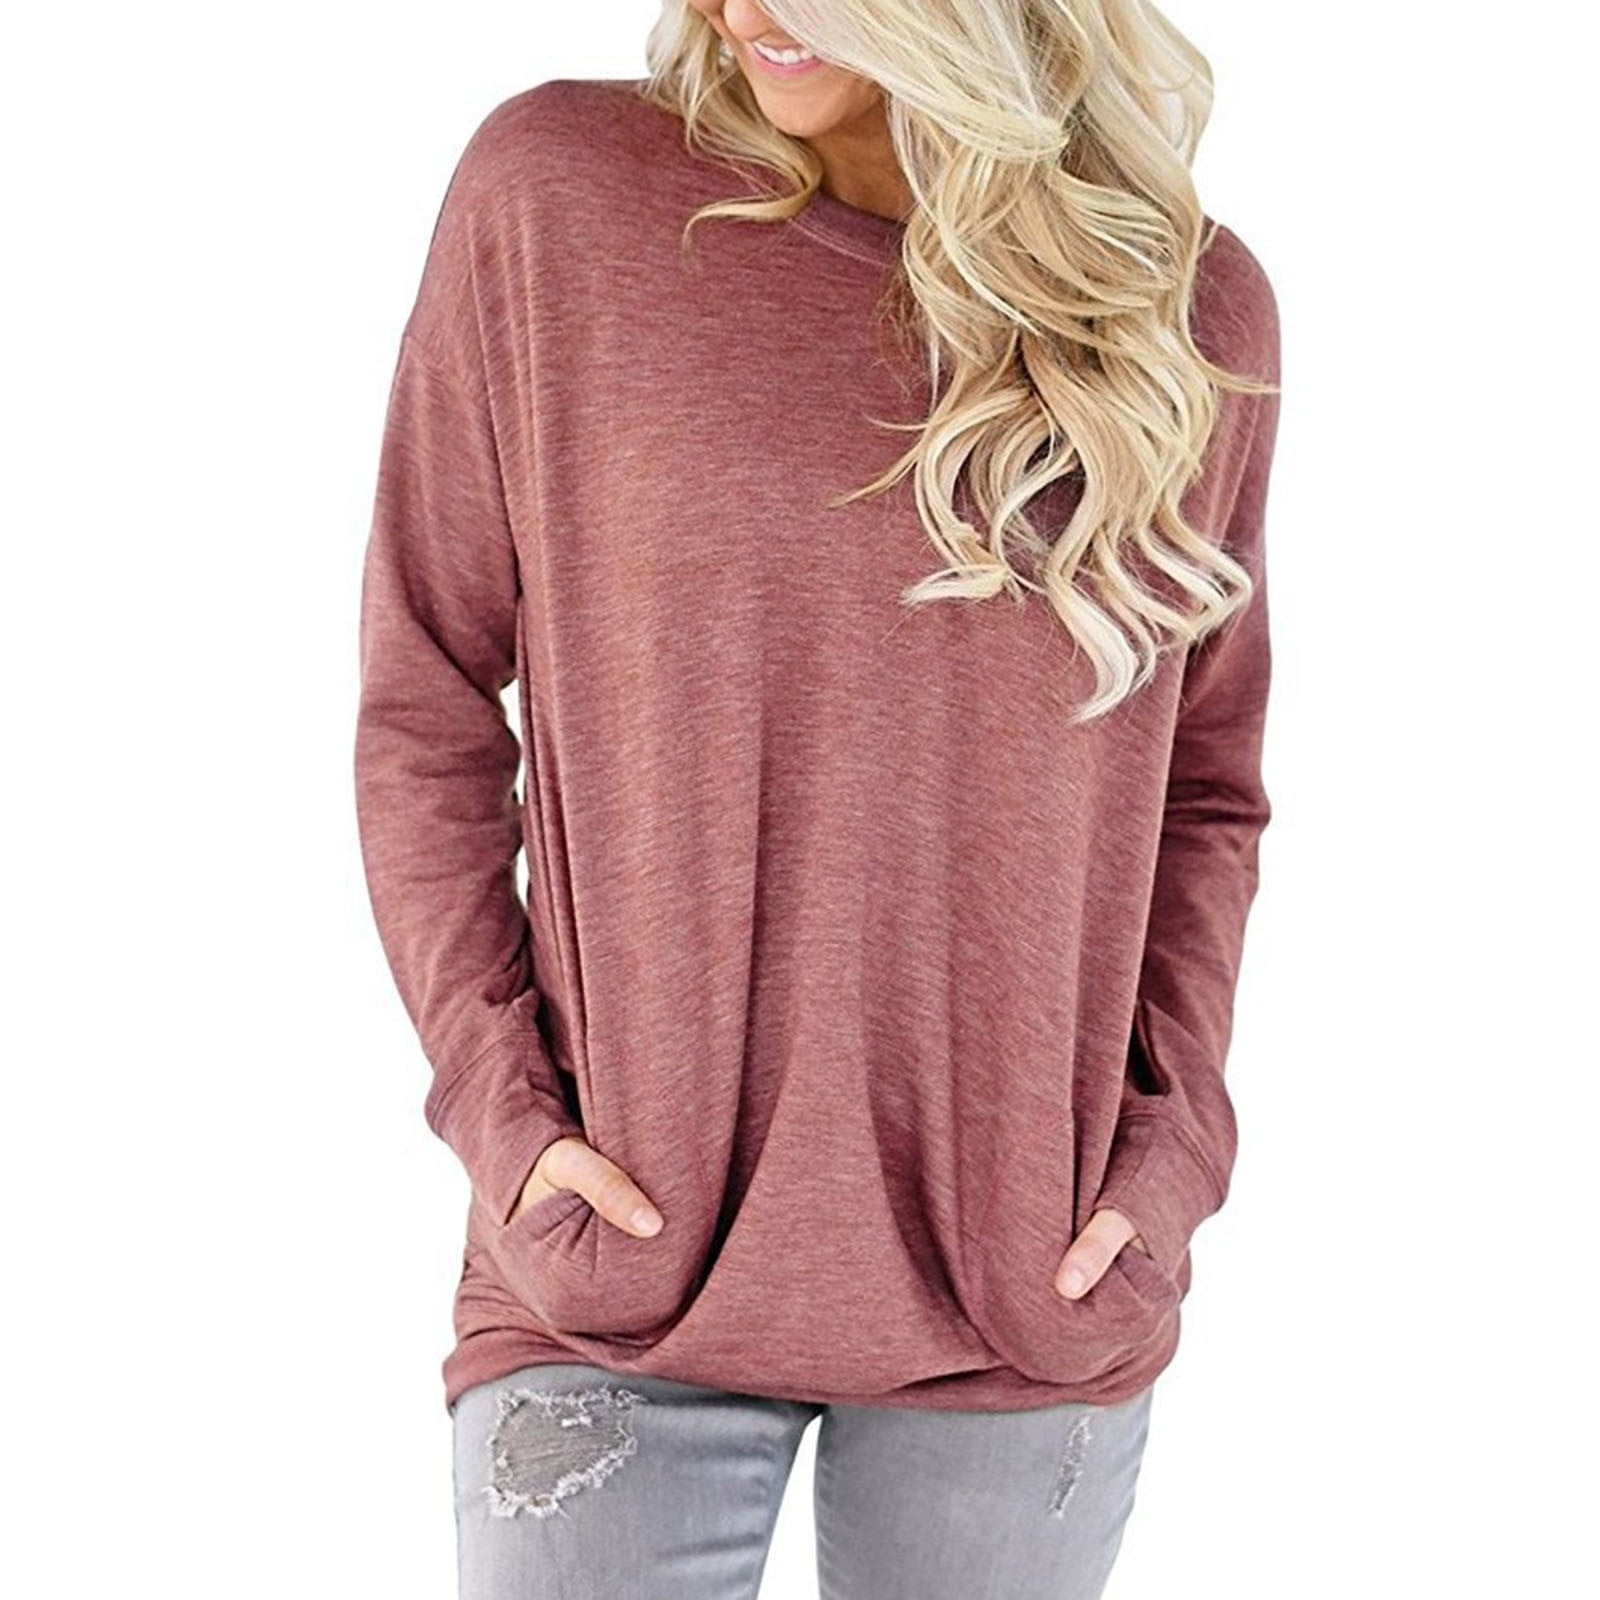 Rrive Womens Long Sleeve Solid Sweatshirt with Pockets Casual Loose T-Shirt Blouse Top